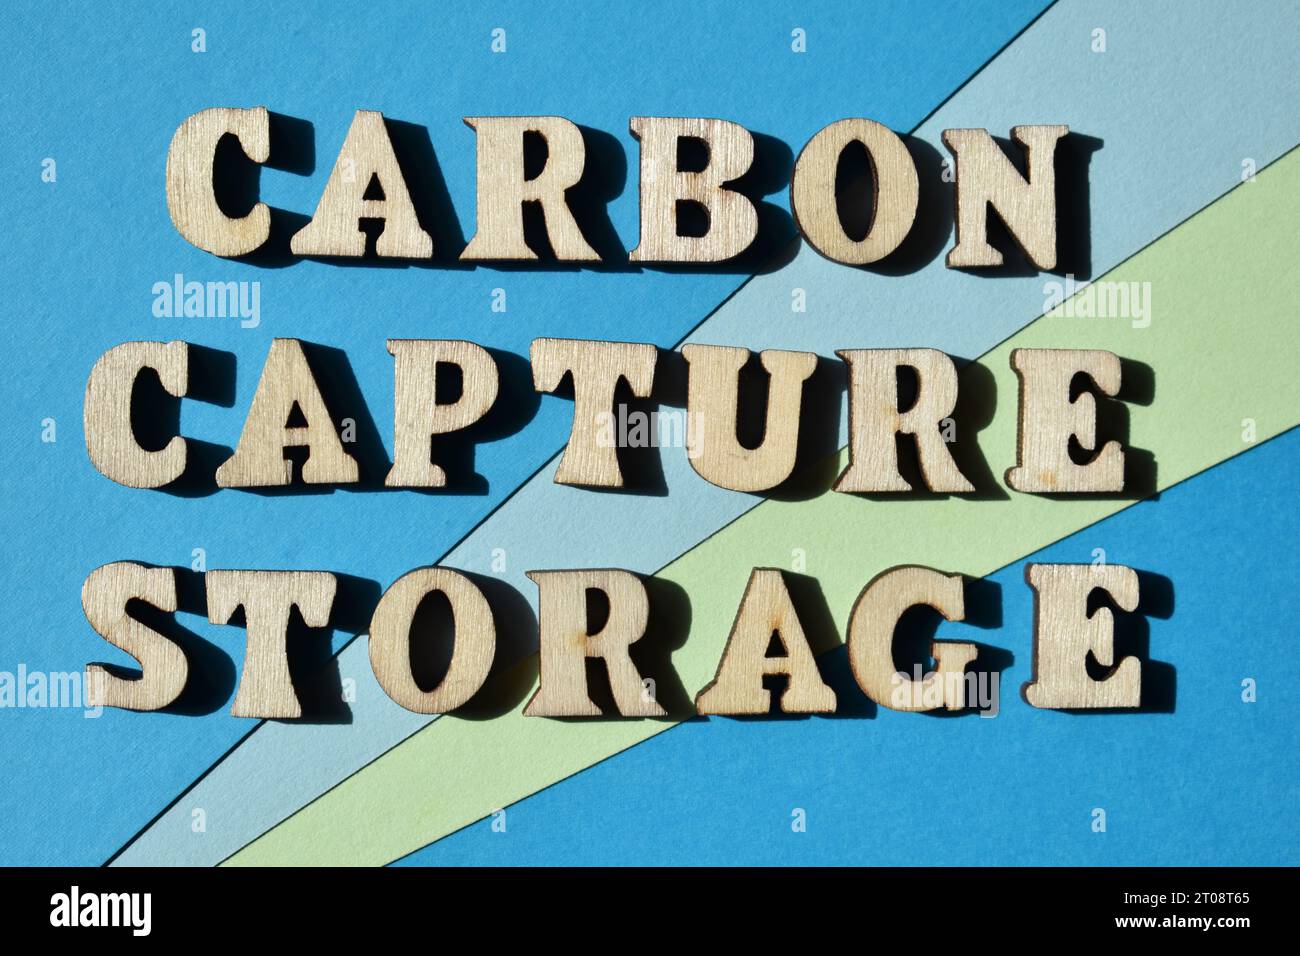 Carbon Capture Storage, words in wooden alphabet letters isolated on blue and green background as banner headline Stock Photo